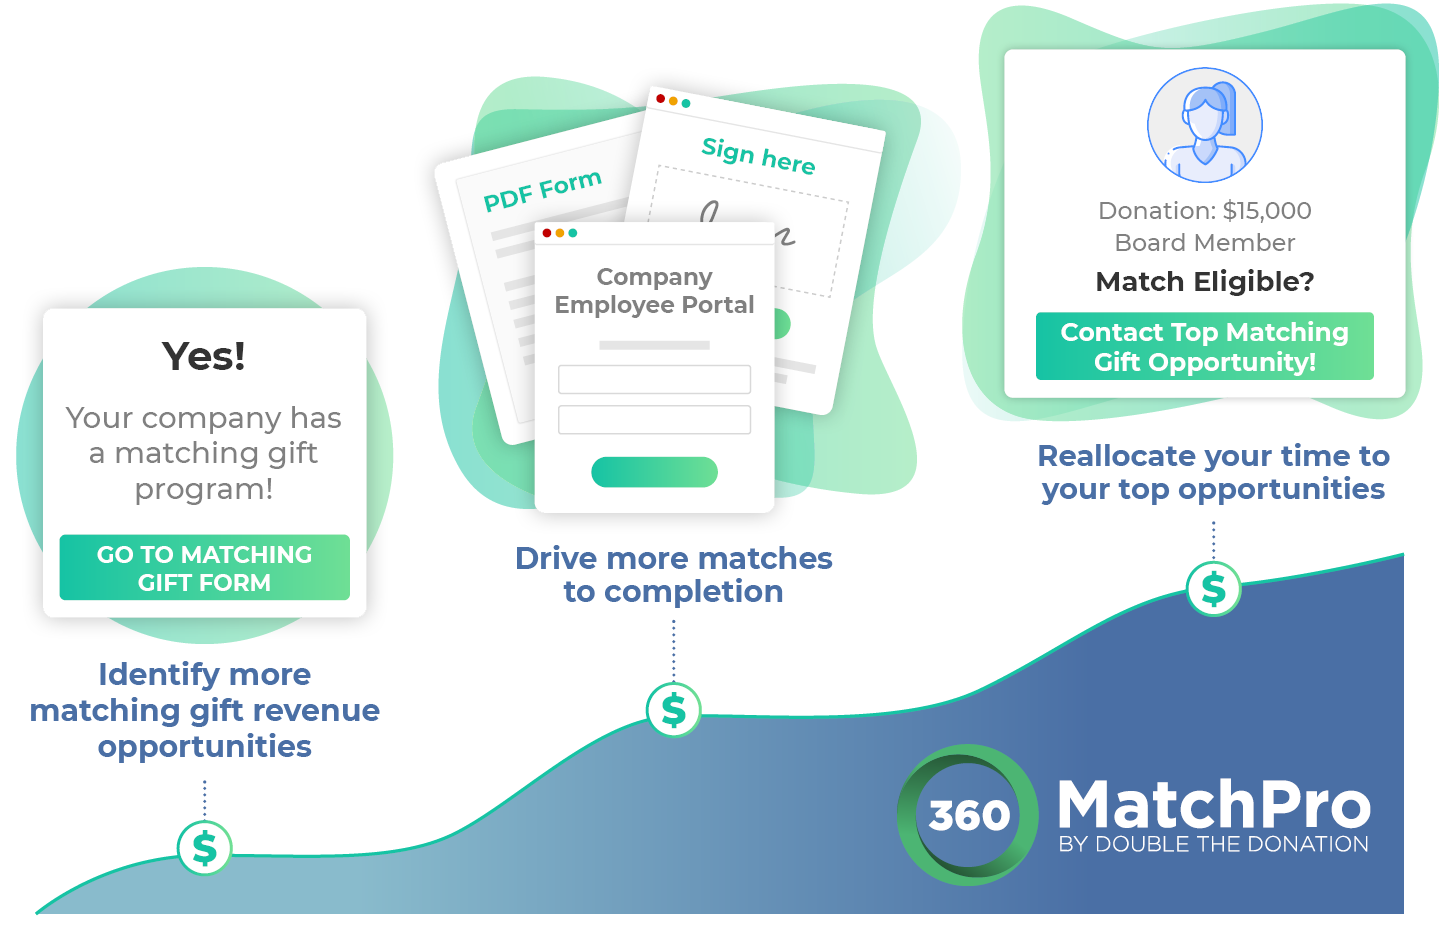 These are the benefits of using 360MatchPro, the top matching gift software vendor for nonprofits.